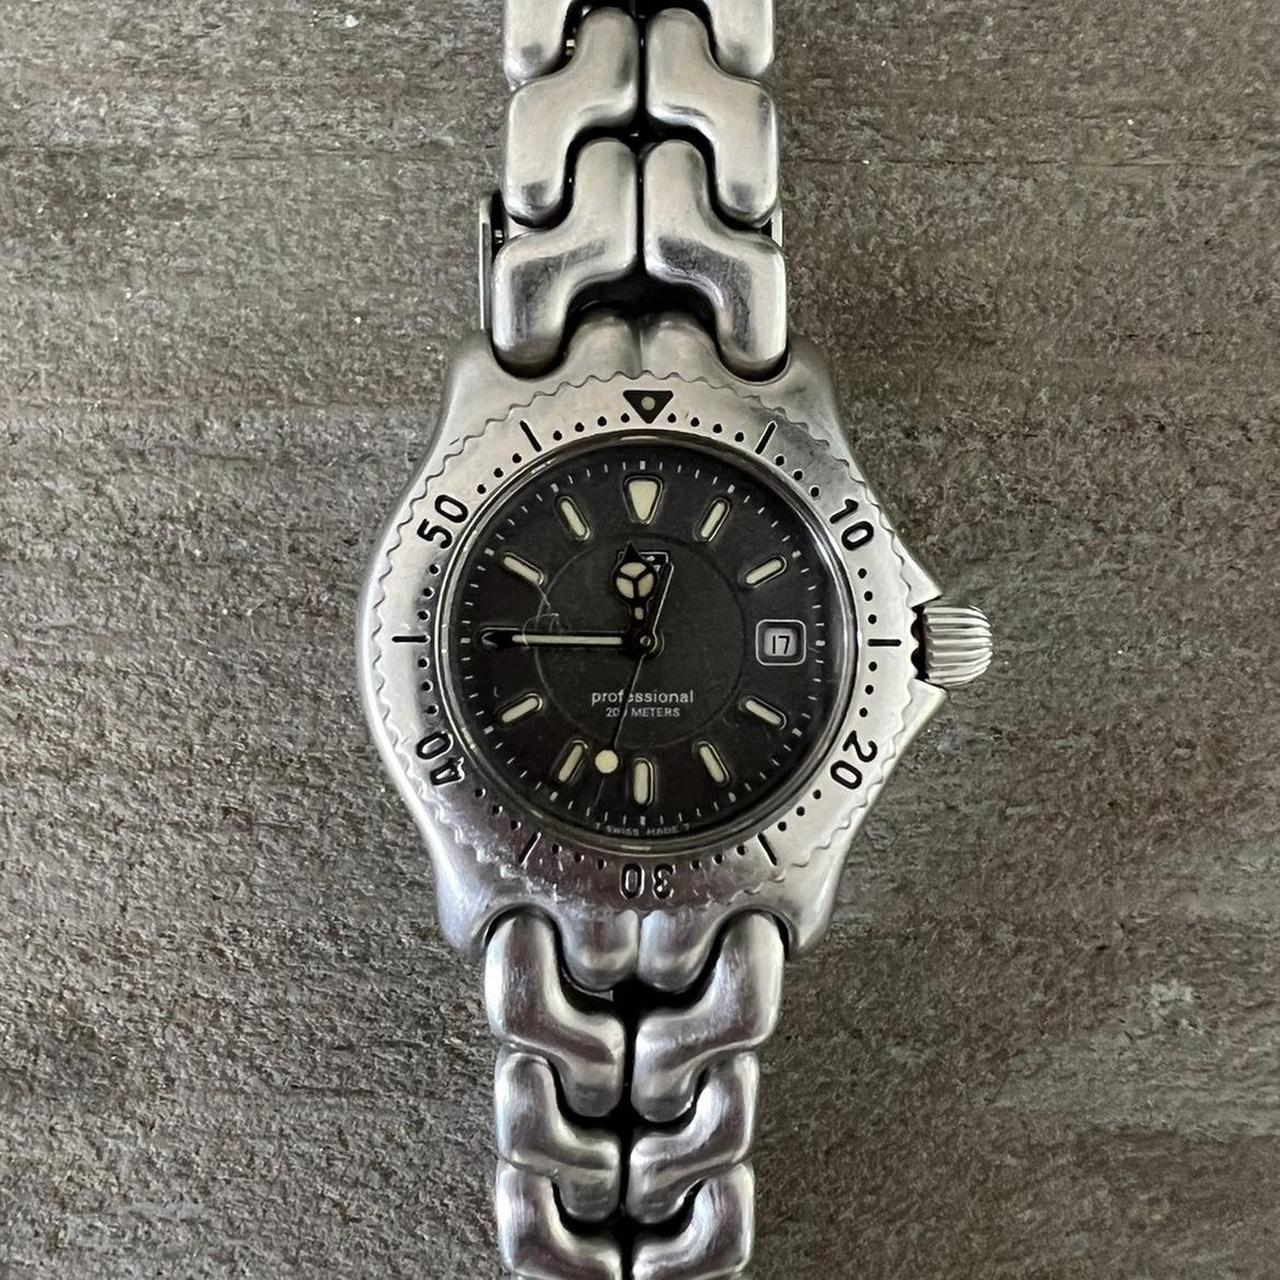 Product Image 1 - Ladies tag heuer watch

Super rare